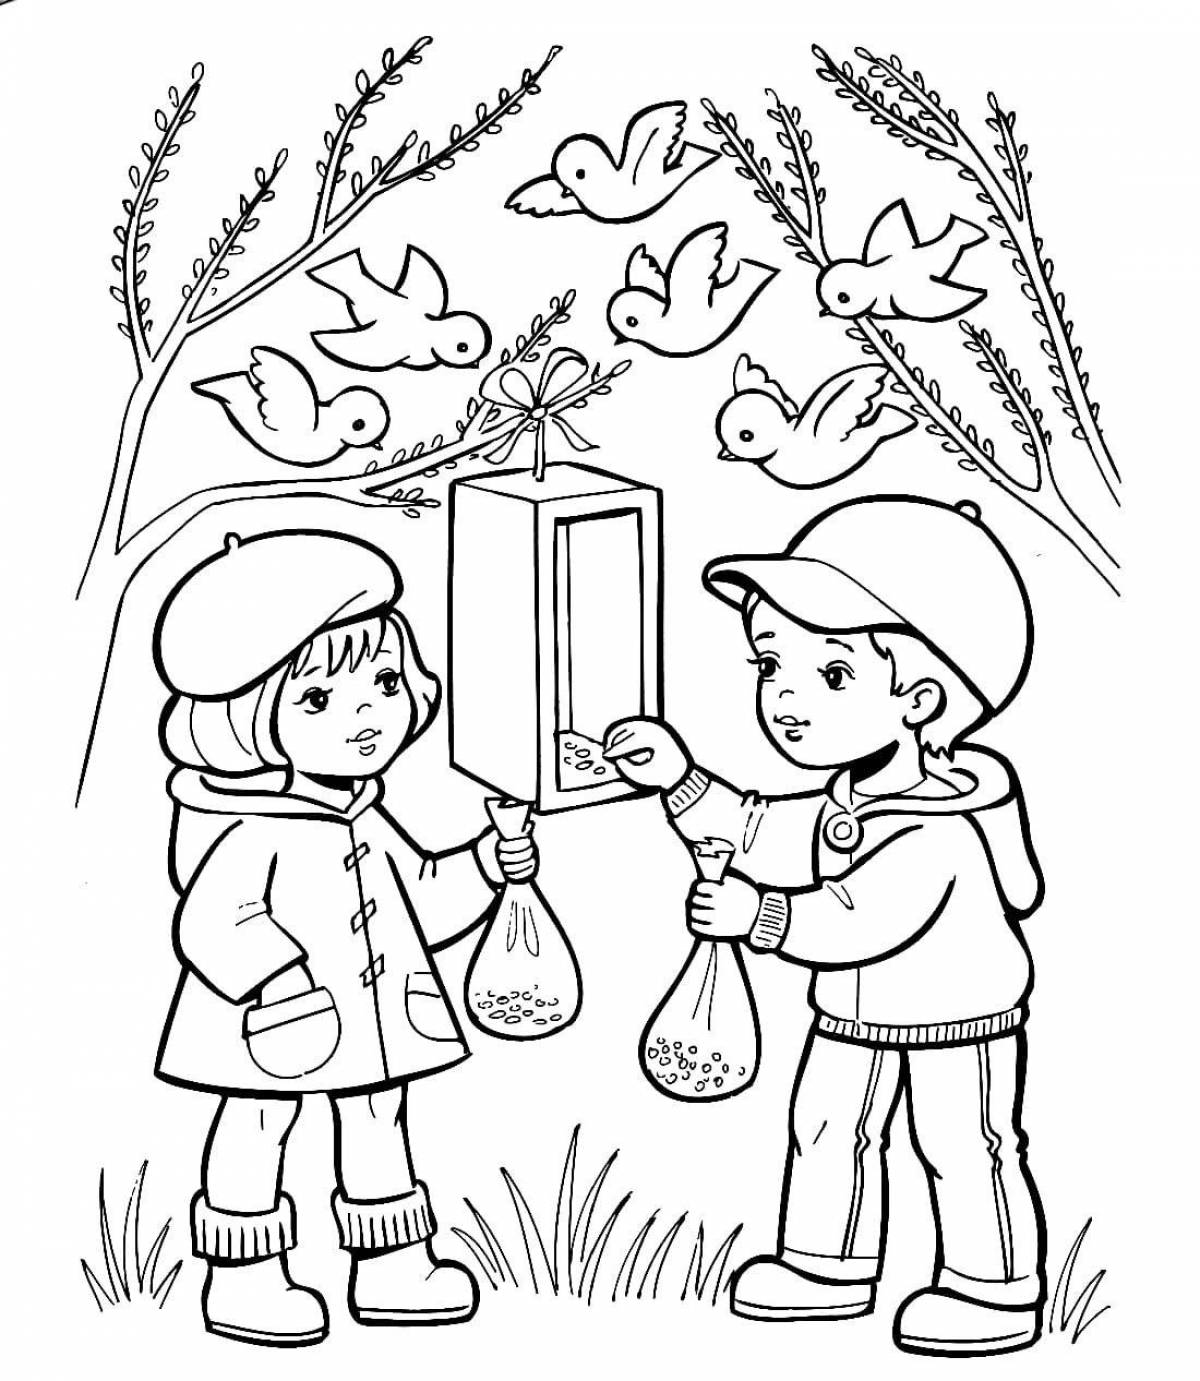 Coloring page dazzling feeder